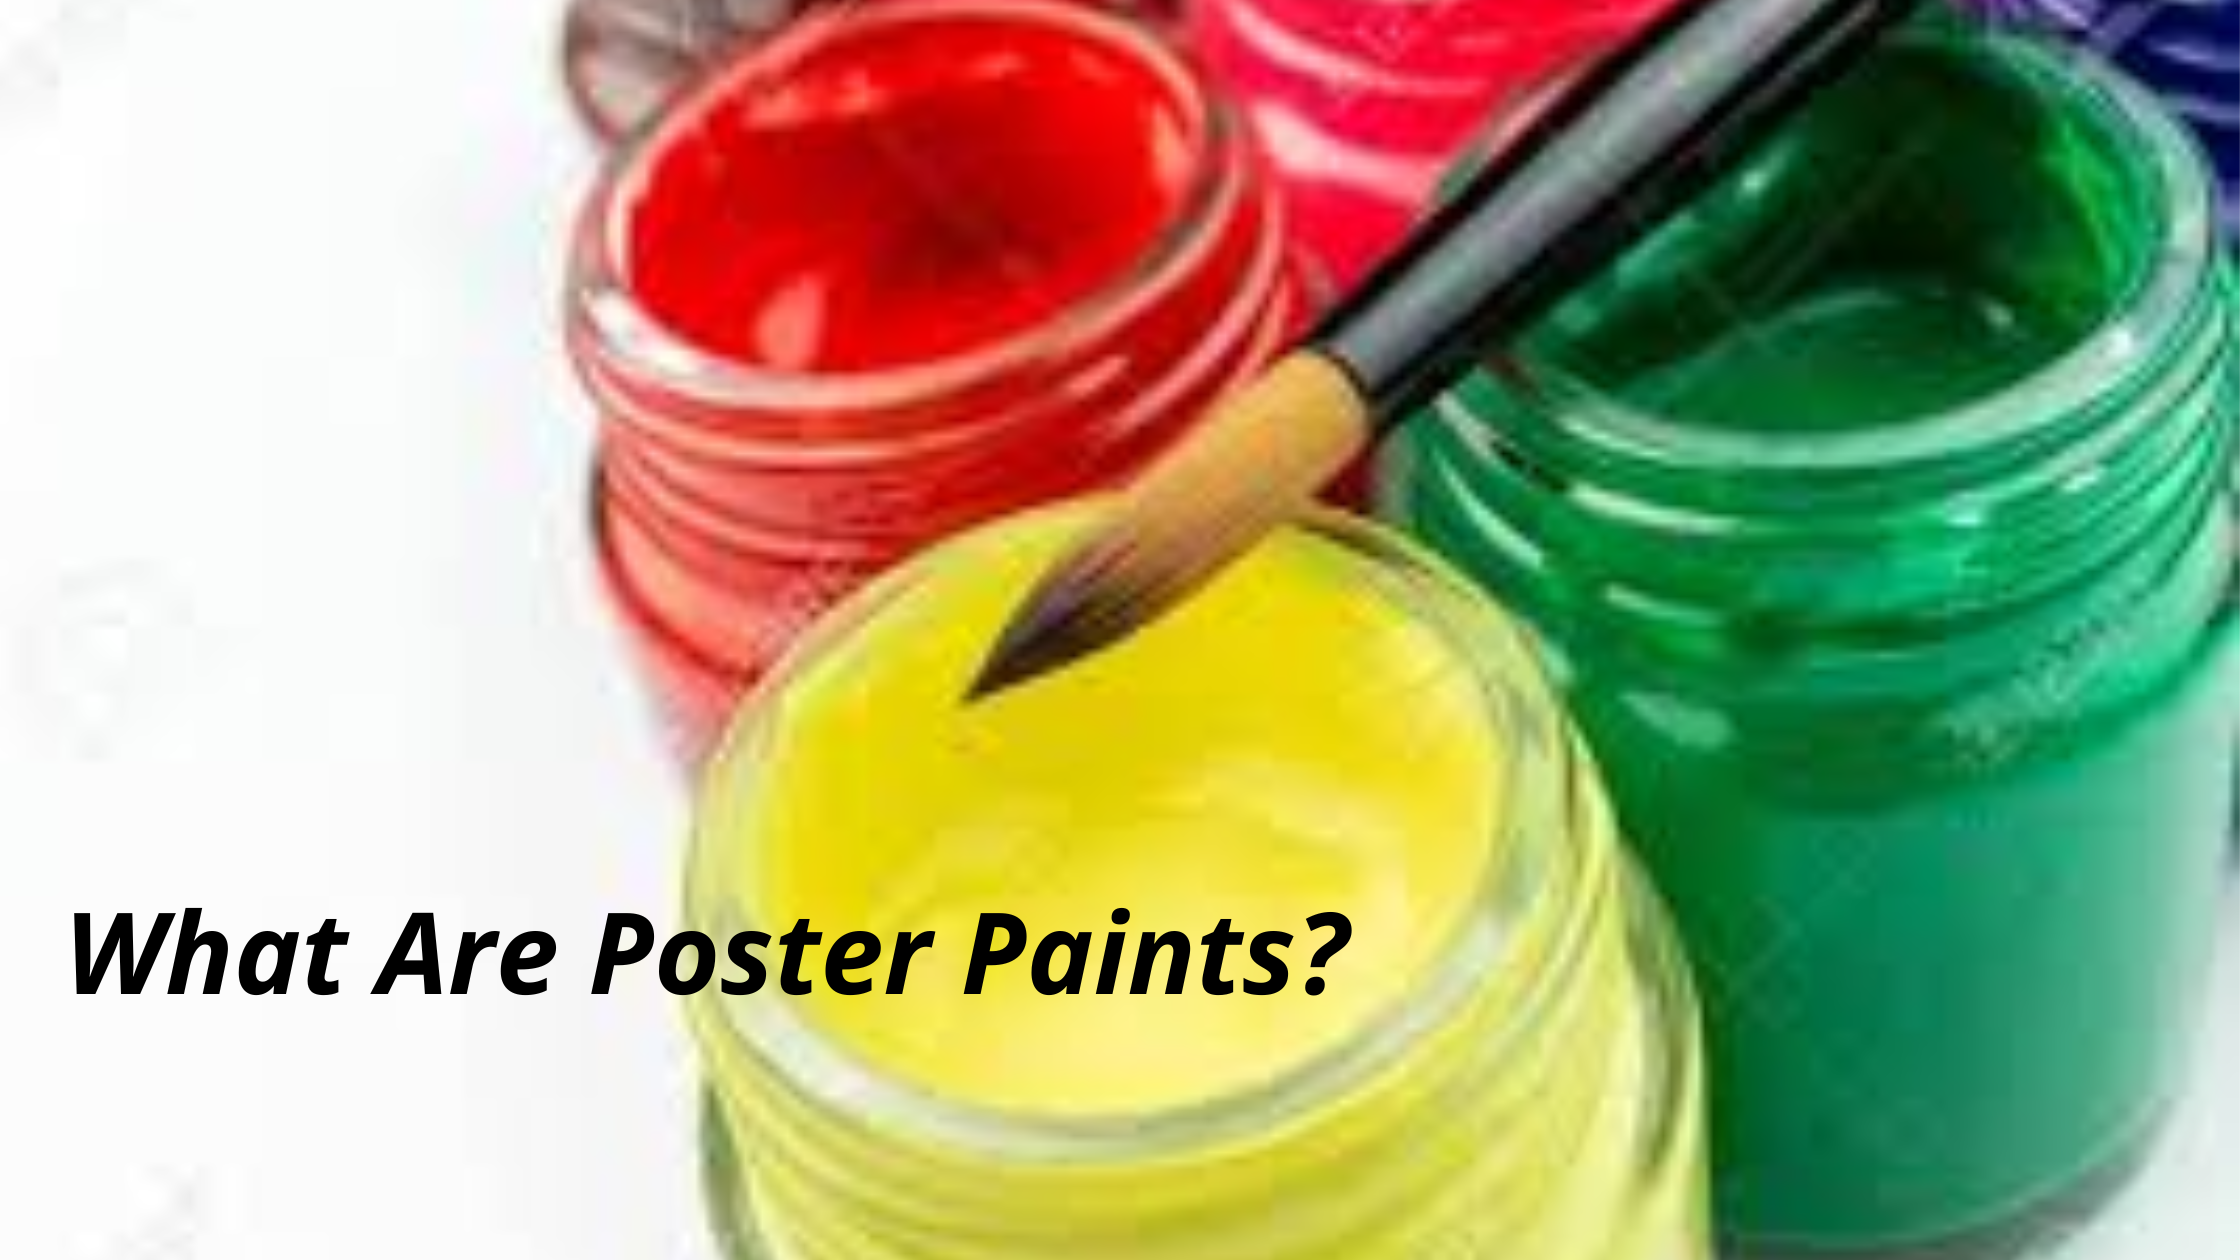 What Are Poster Paints?